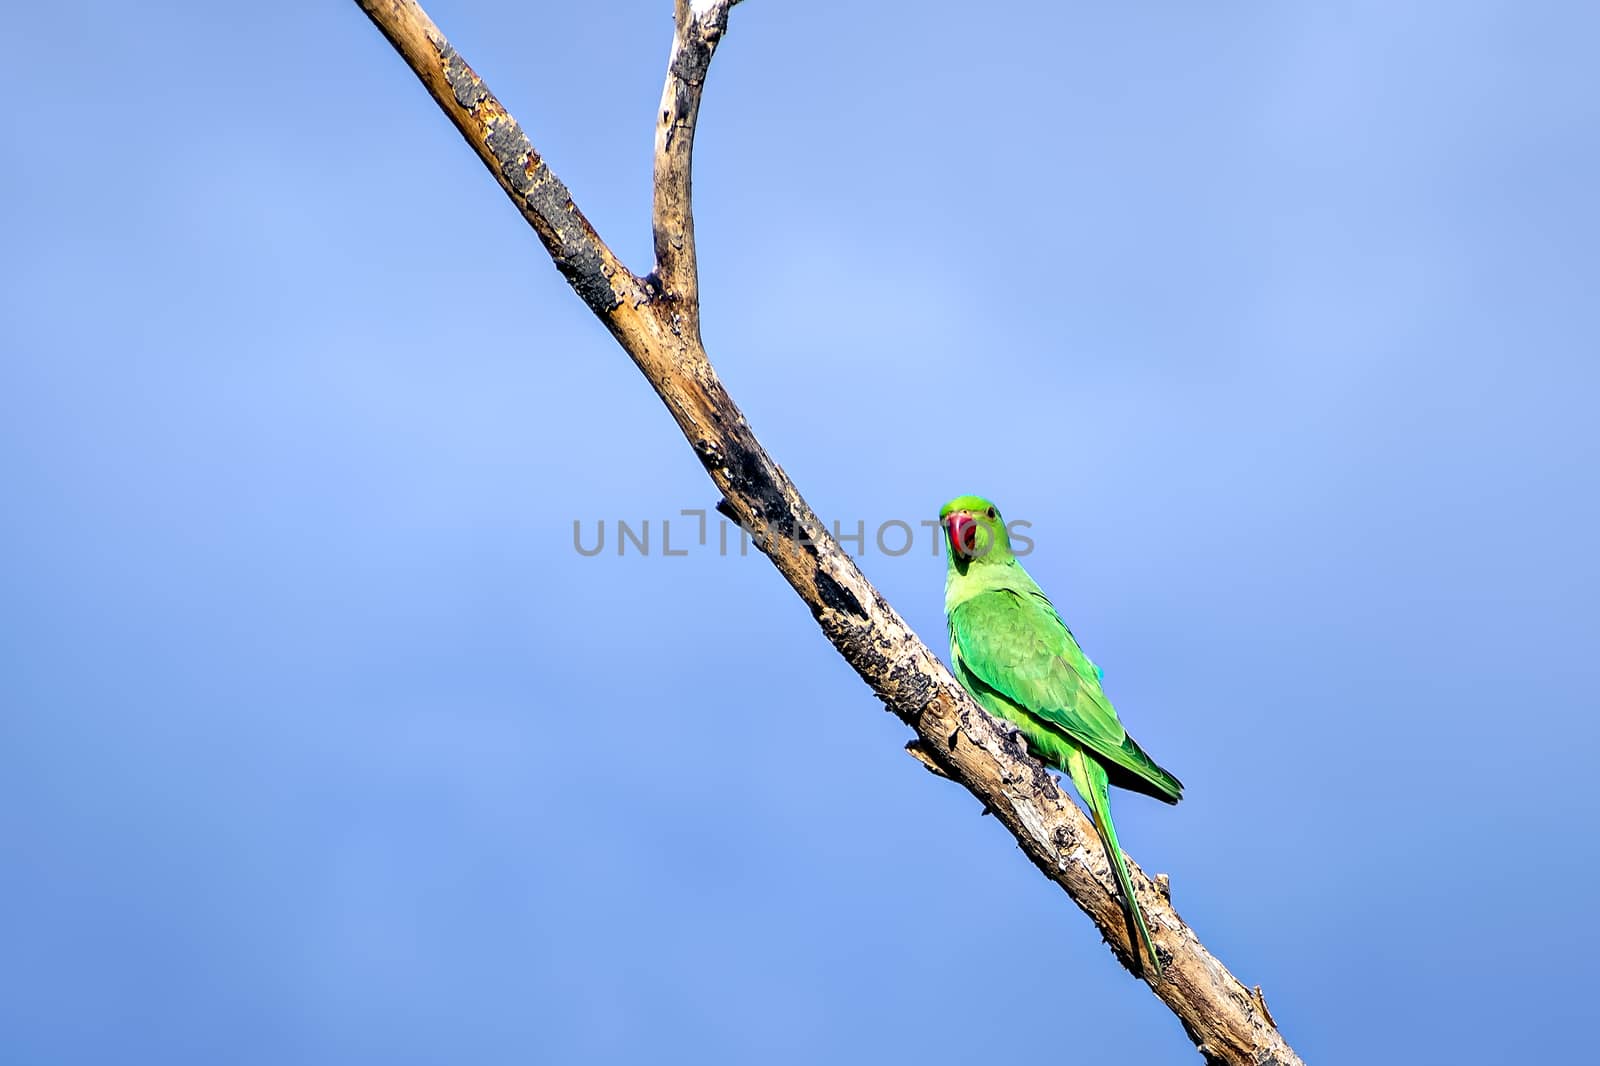 Indian ring-necked parakeet(Psittacula krameri) parrot sitting on dry tree branch with clear blue sky background.